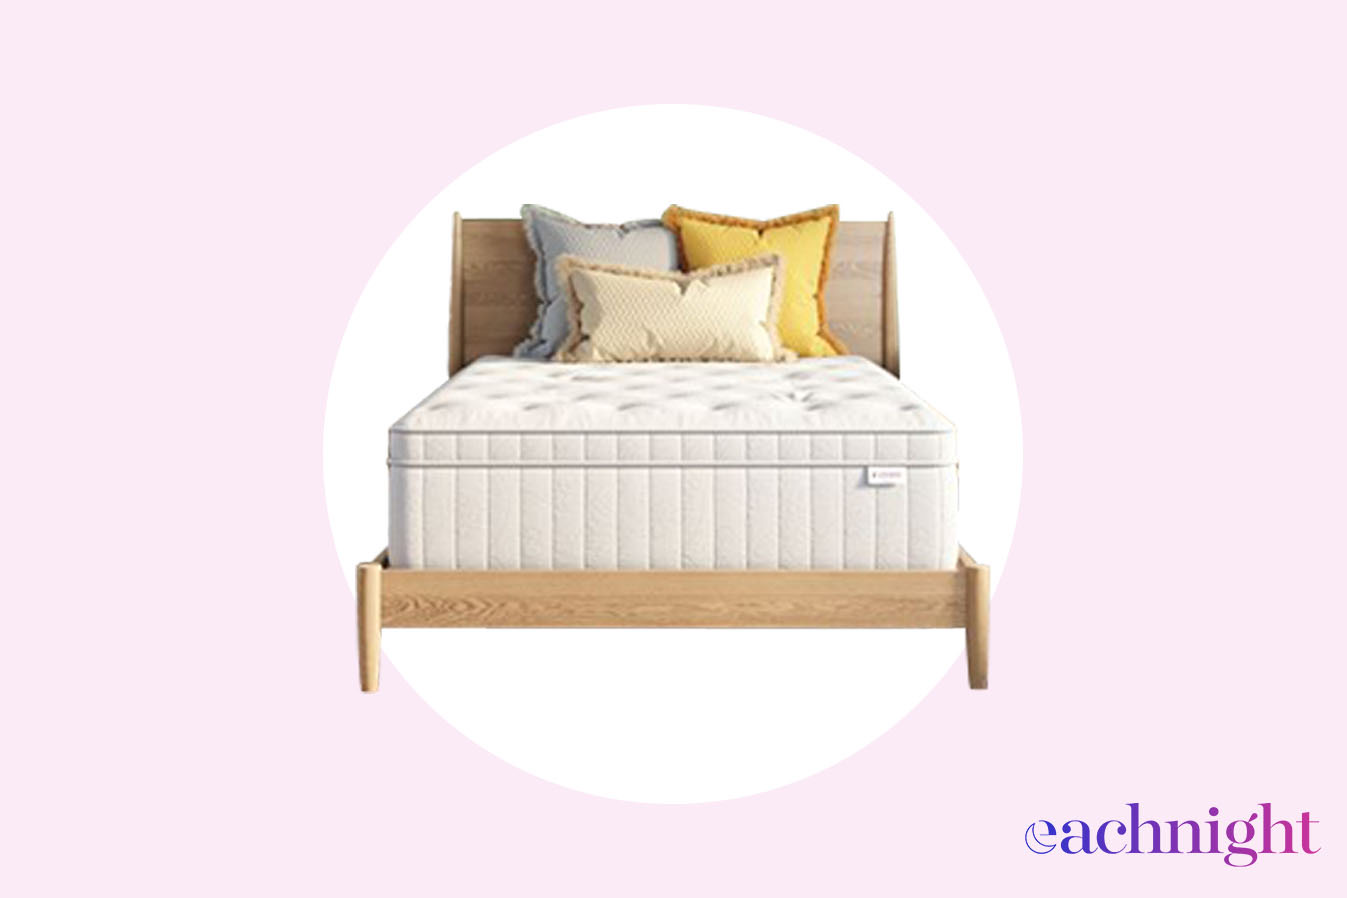 Best Mattresses Without Memory Foam: Reviews - eachnight